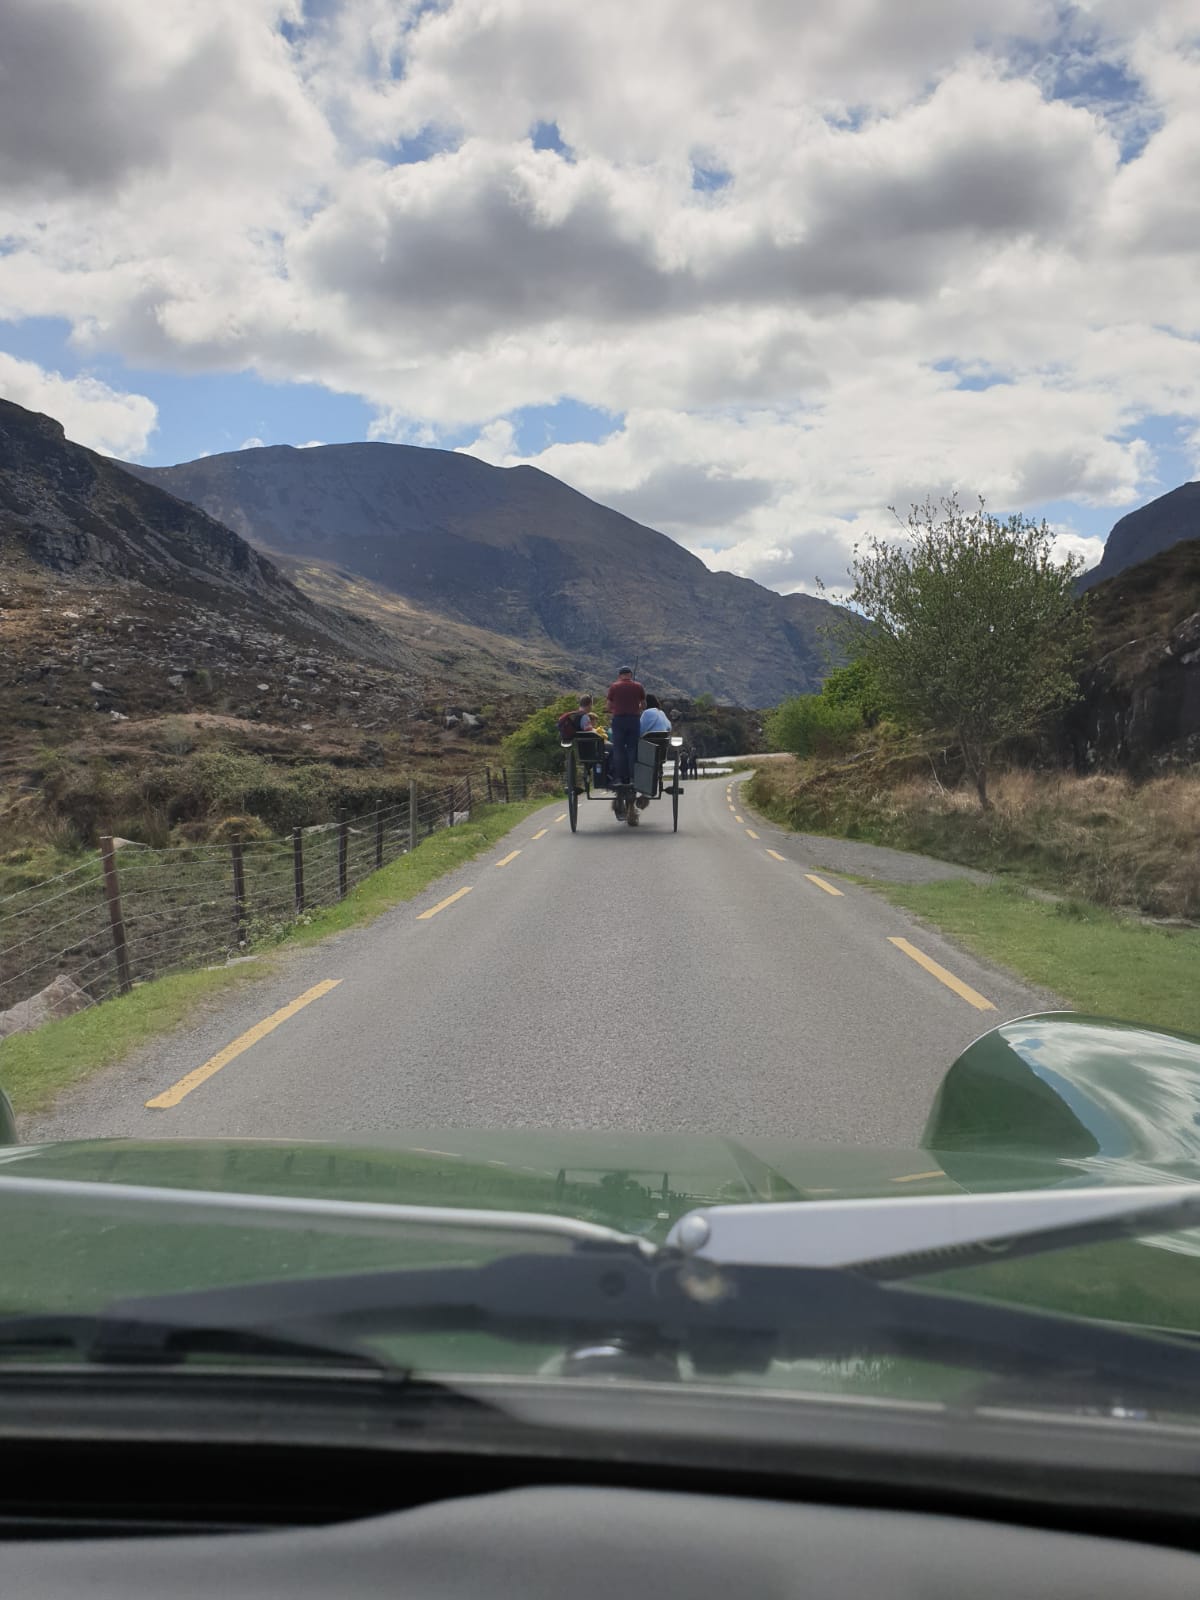 Nigel Allen VW - Gap of dunloe, behind horse and cart - Cape to cape